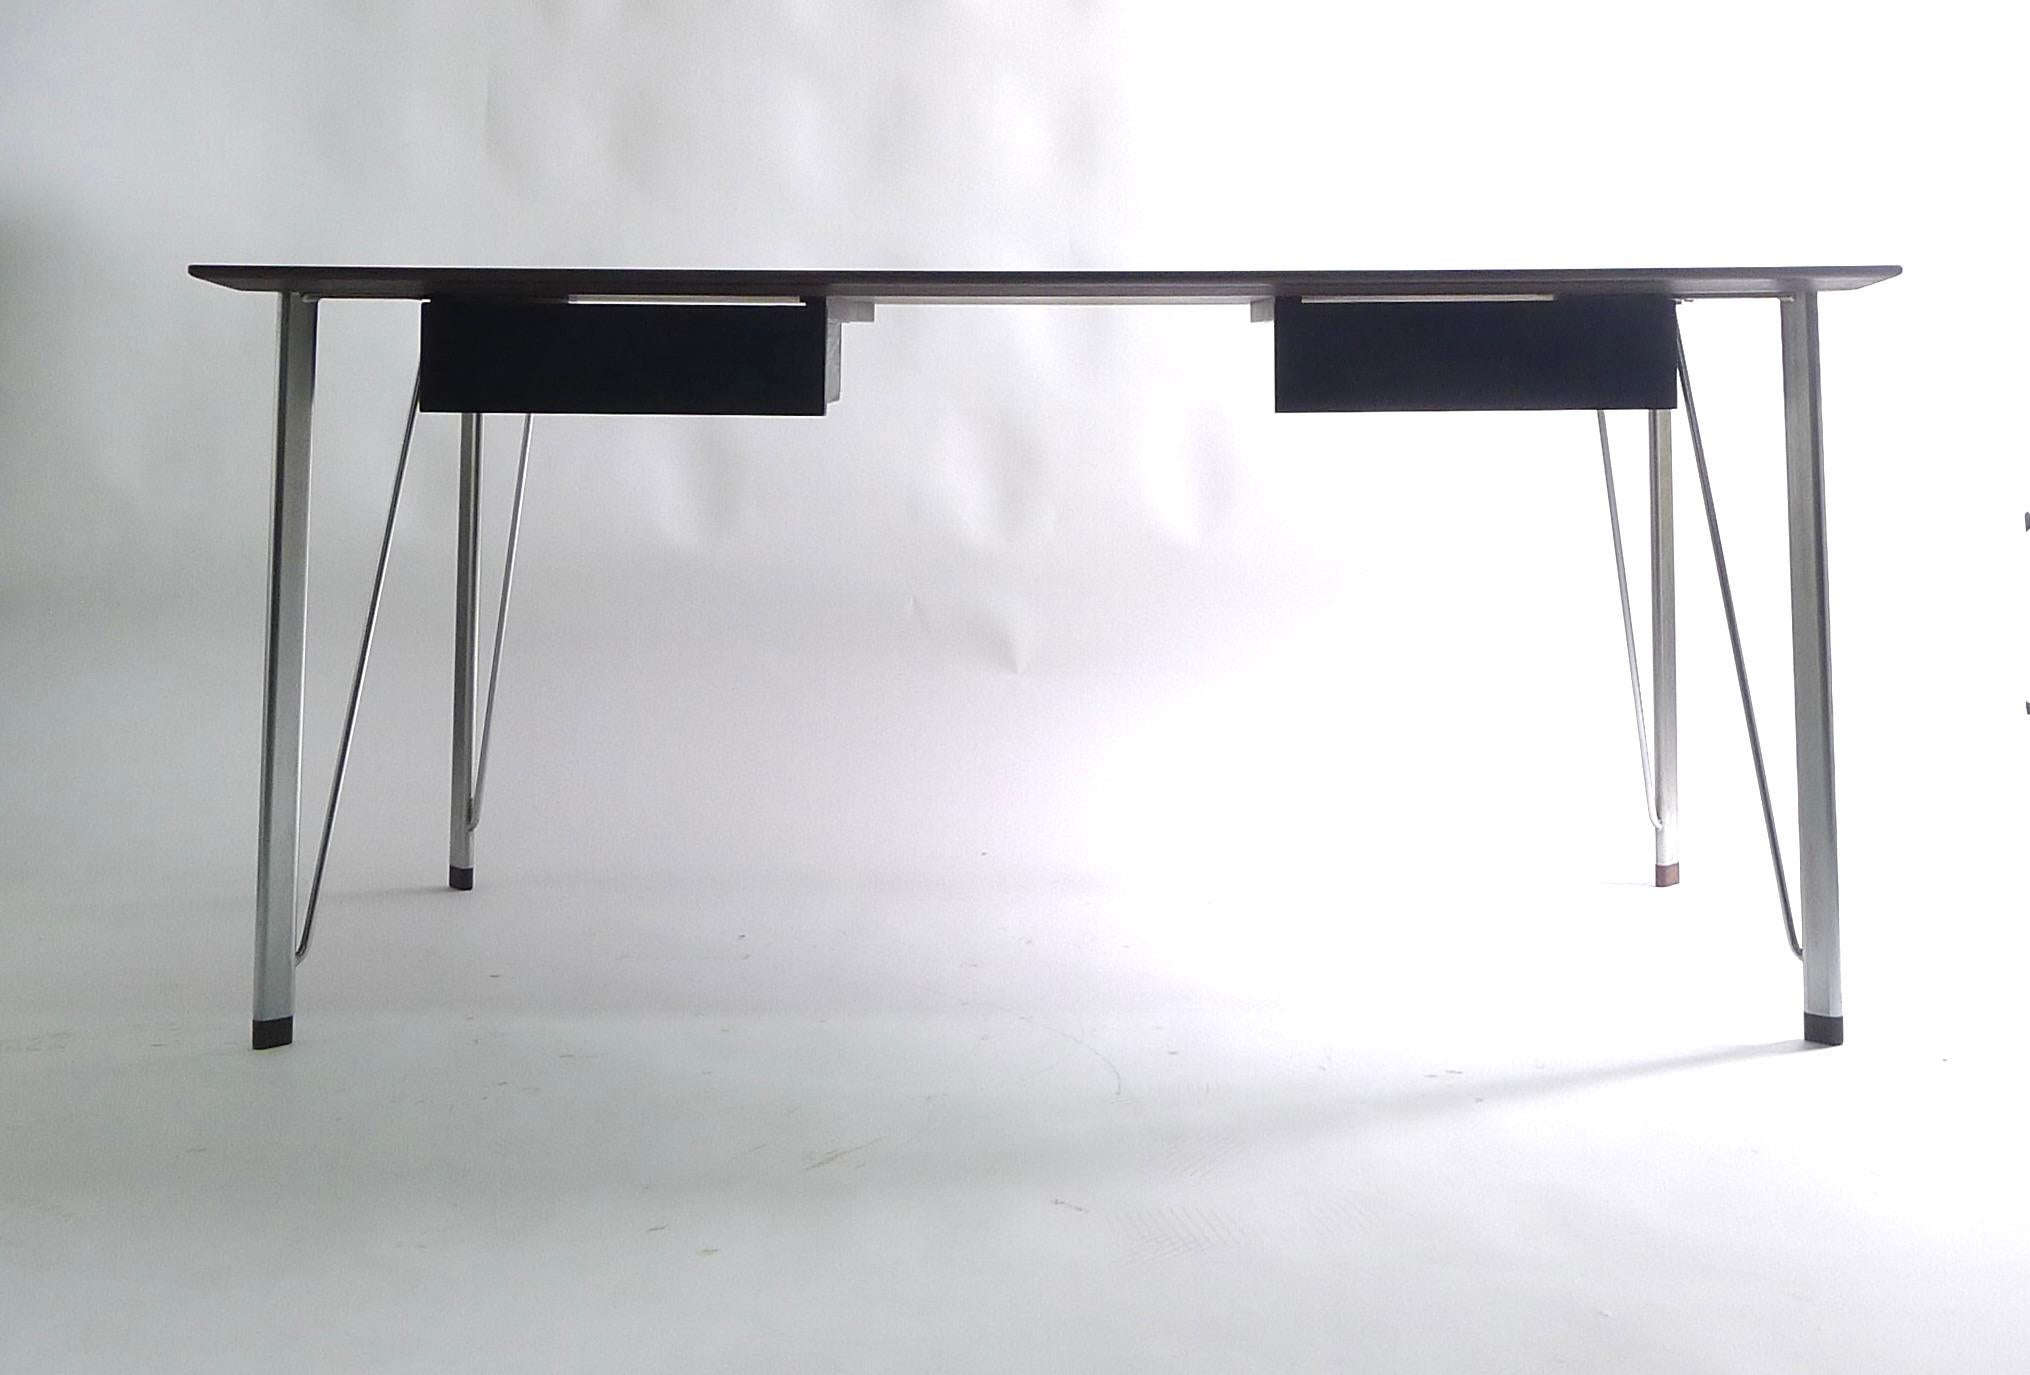 Arne Jacobsen, FH 3605 writing desk, designed 1955 and made by Fritz Hansen, Denmark, in rosewood with detachable aluminium legs with oval rosewood caps. Fitted two drawers to one side. Remnants of Fritz Hansen label just visible to